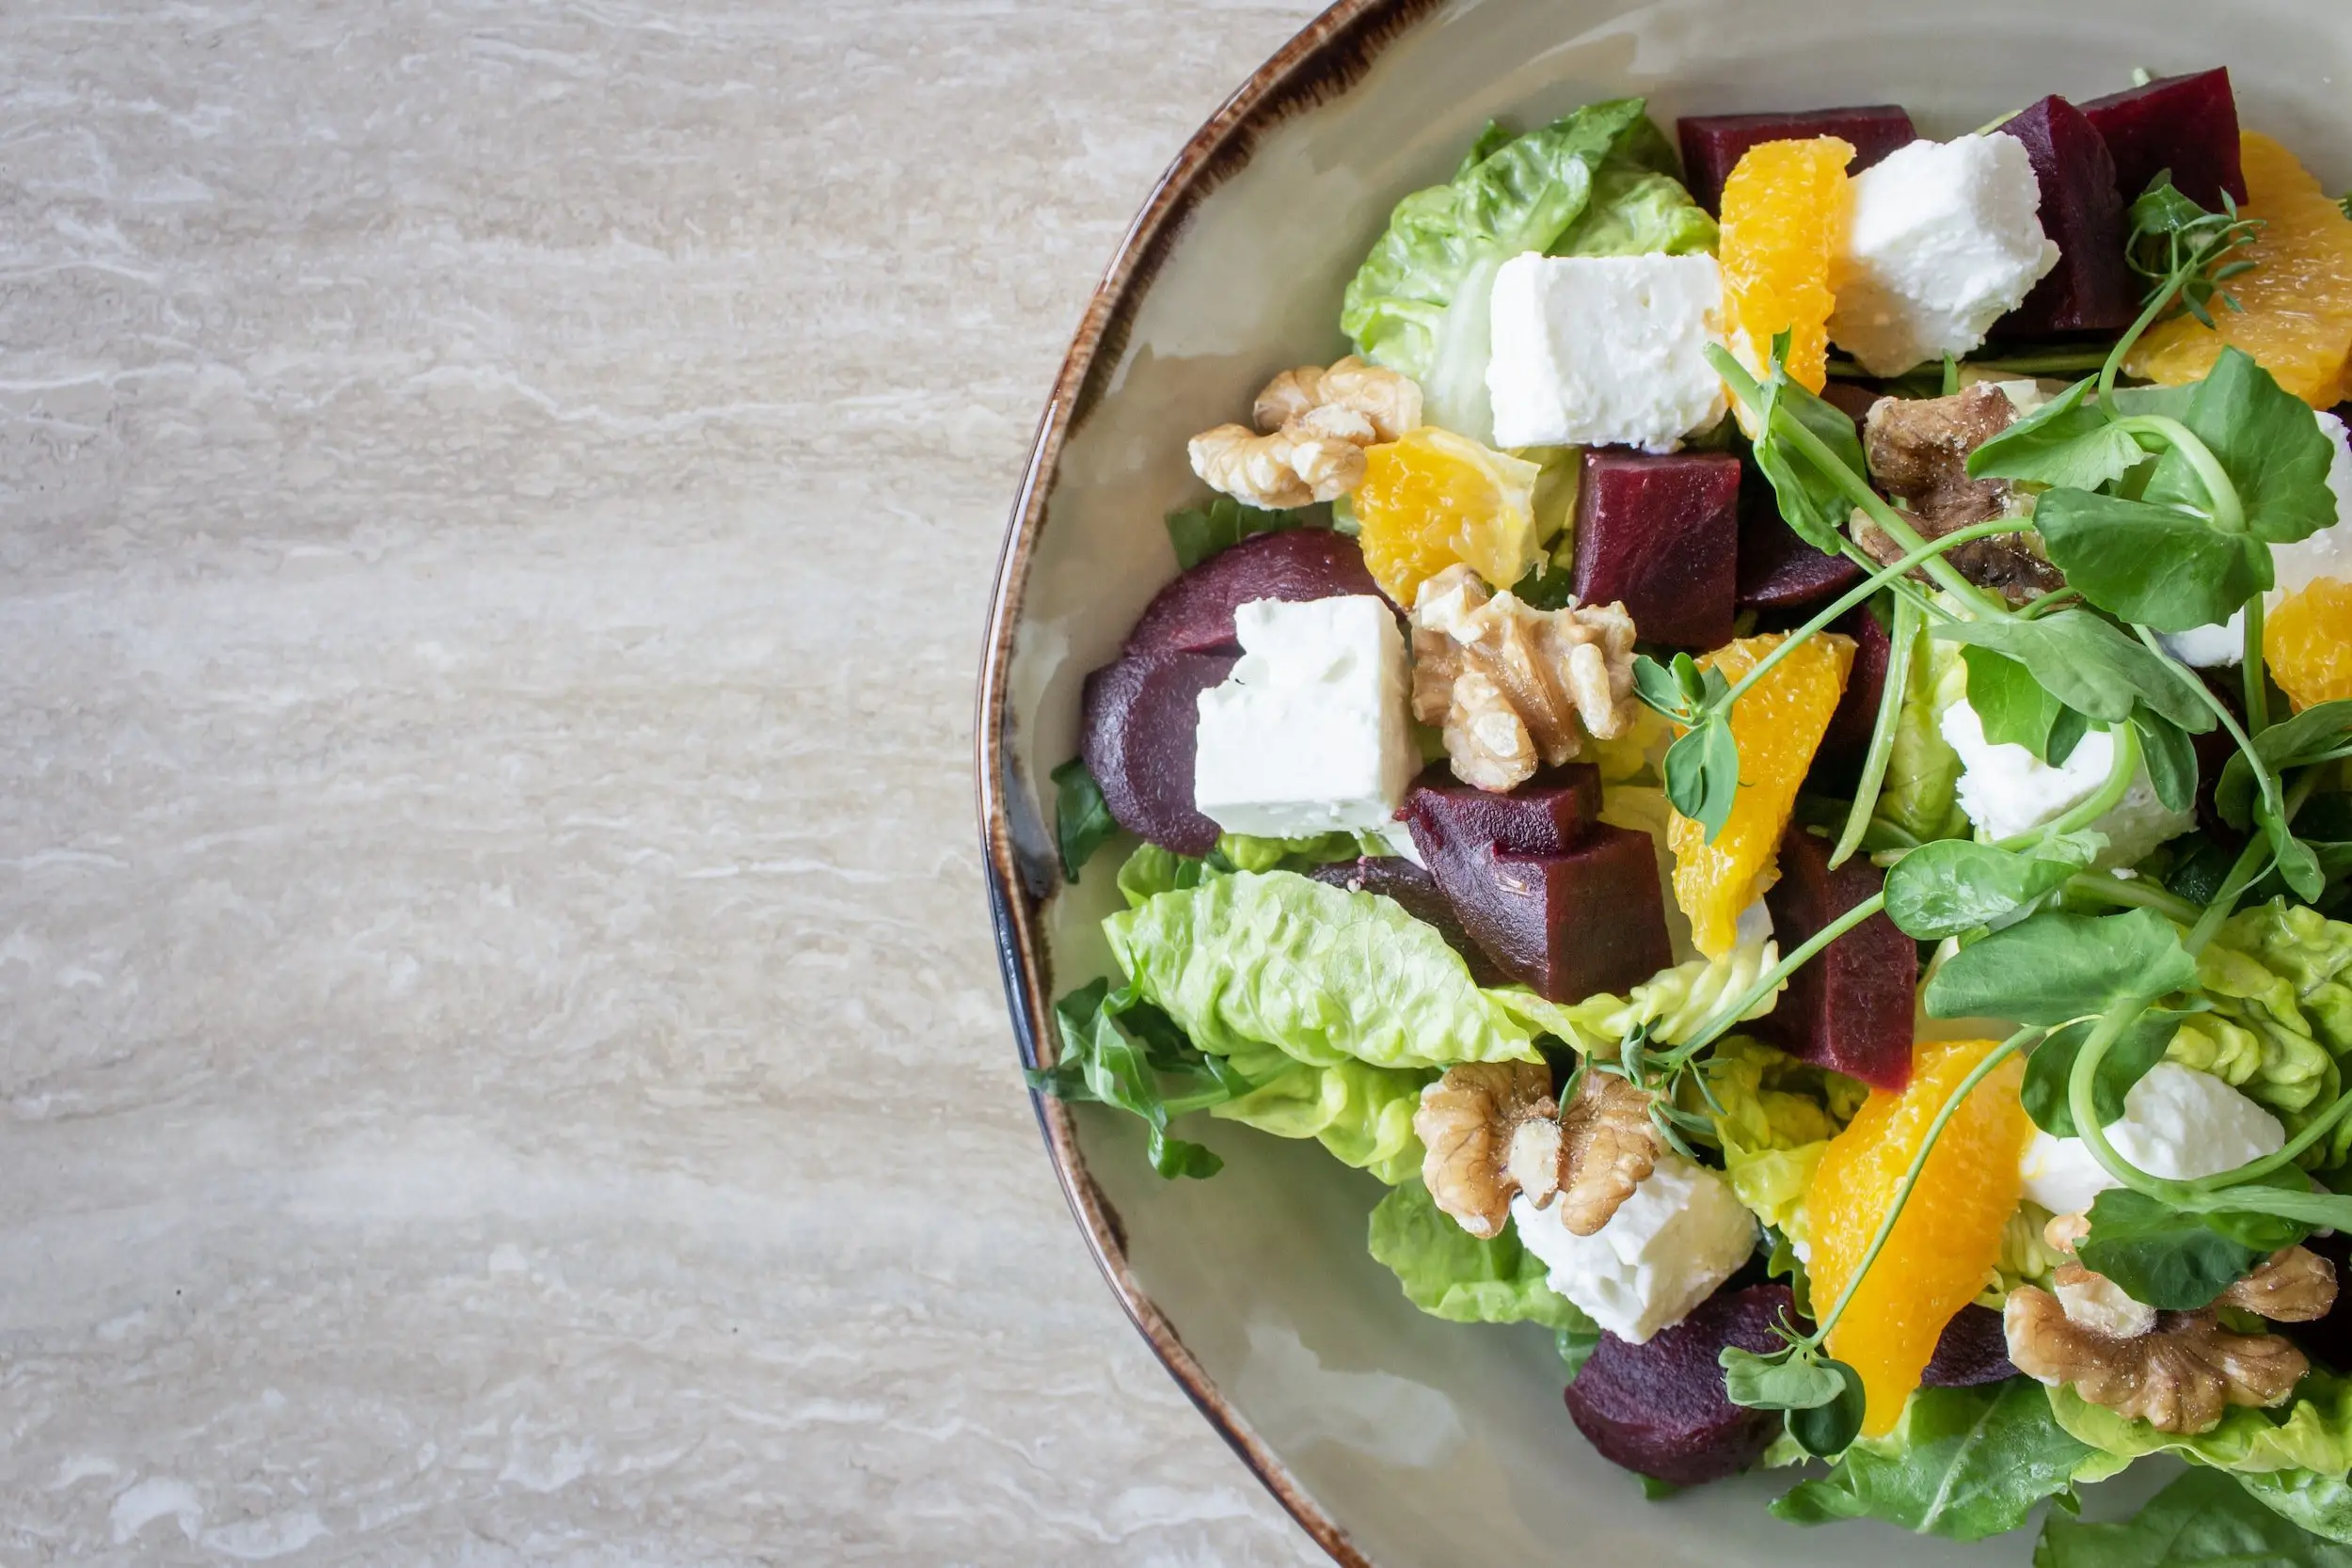 Salad with cheese and beets Vermentino pairing